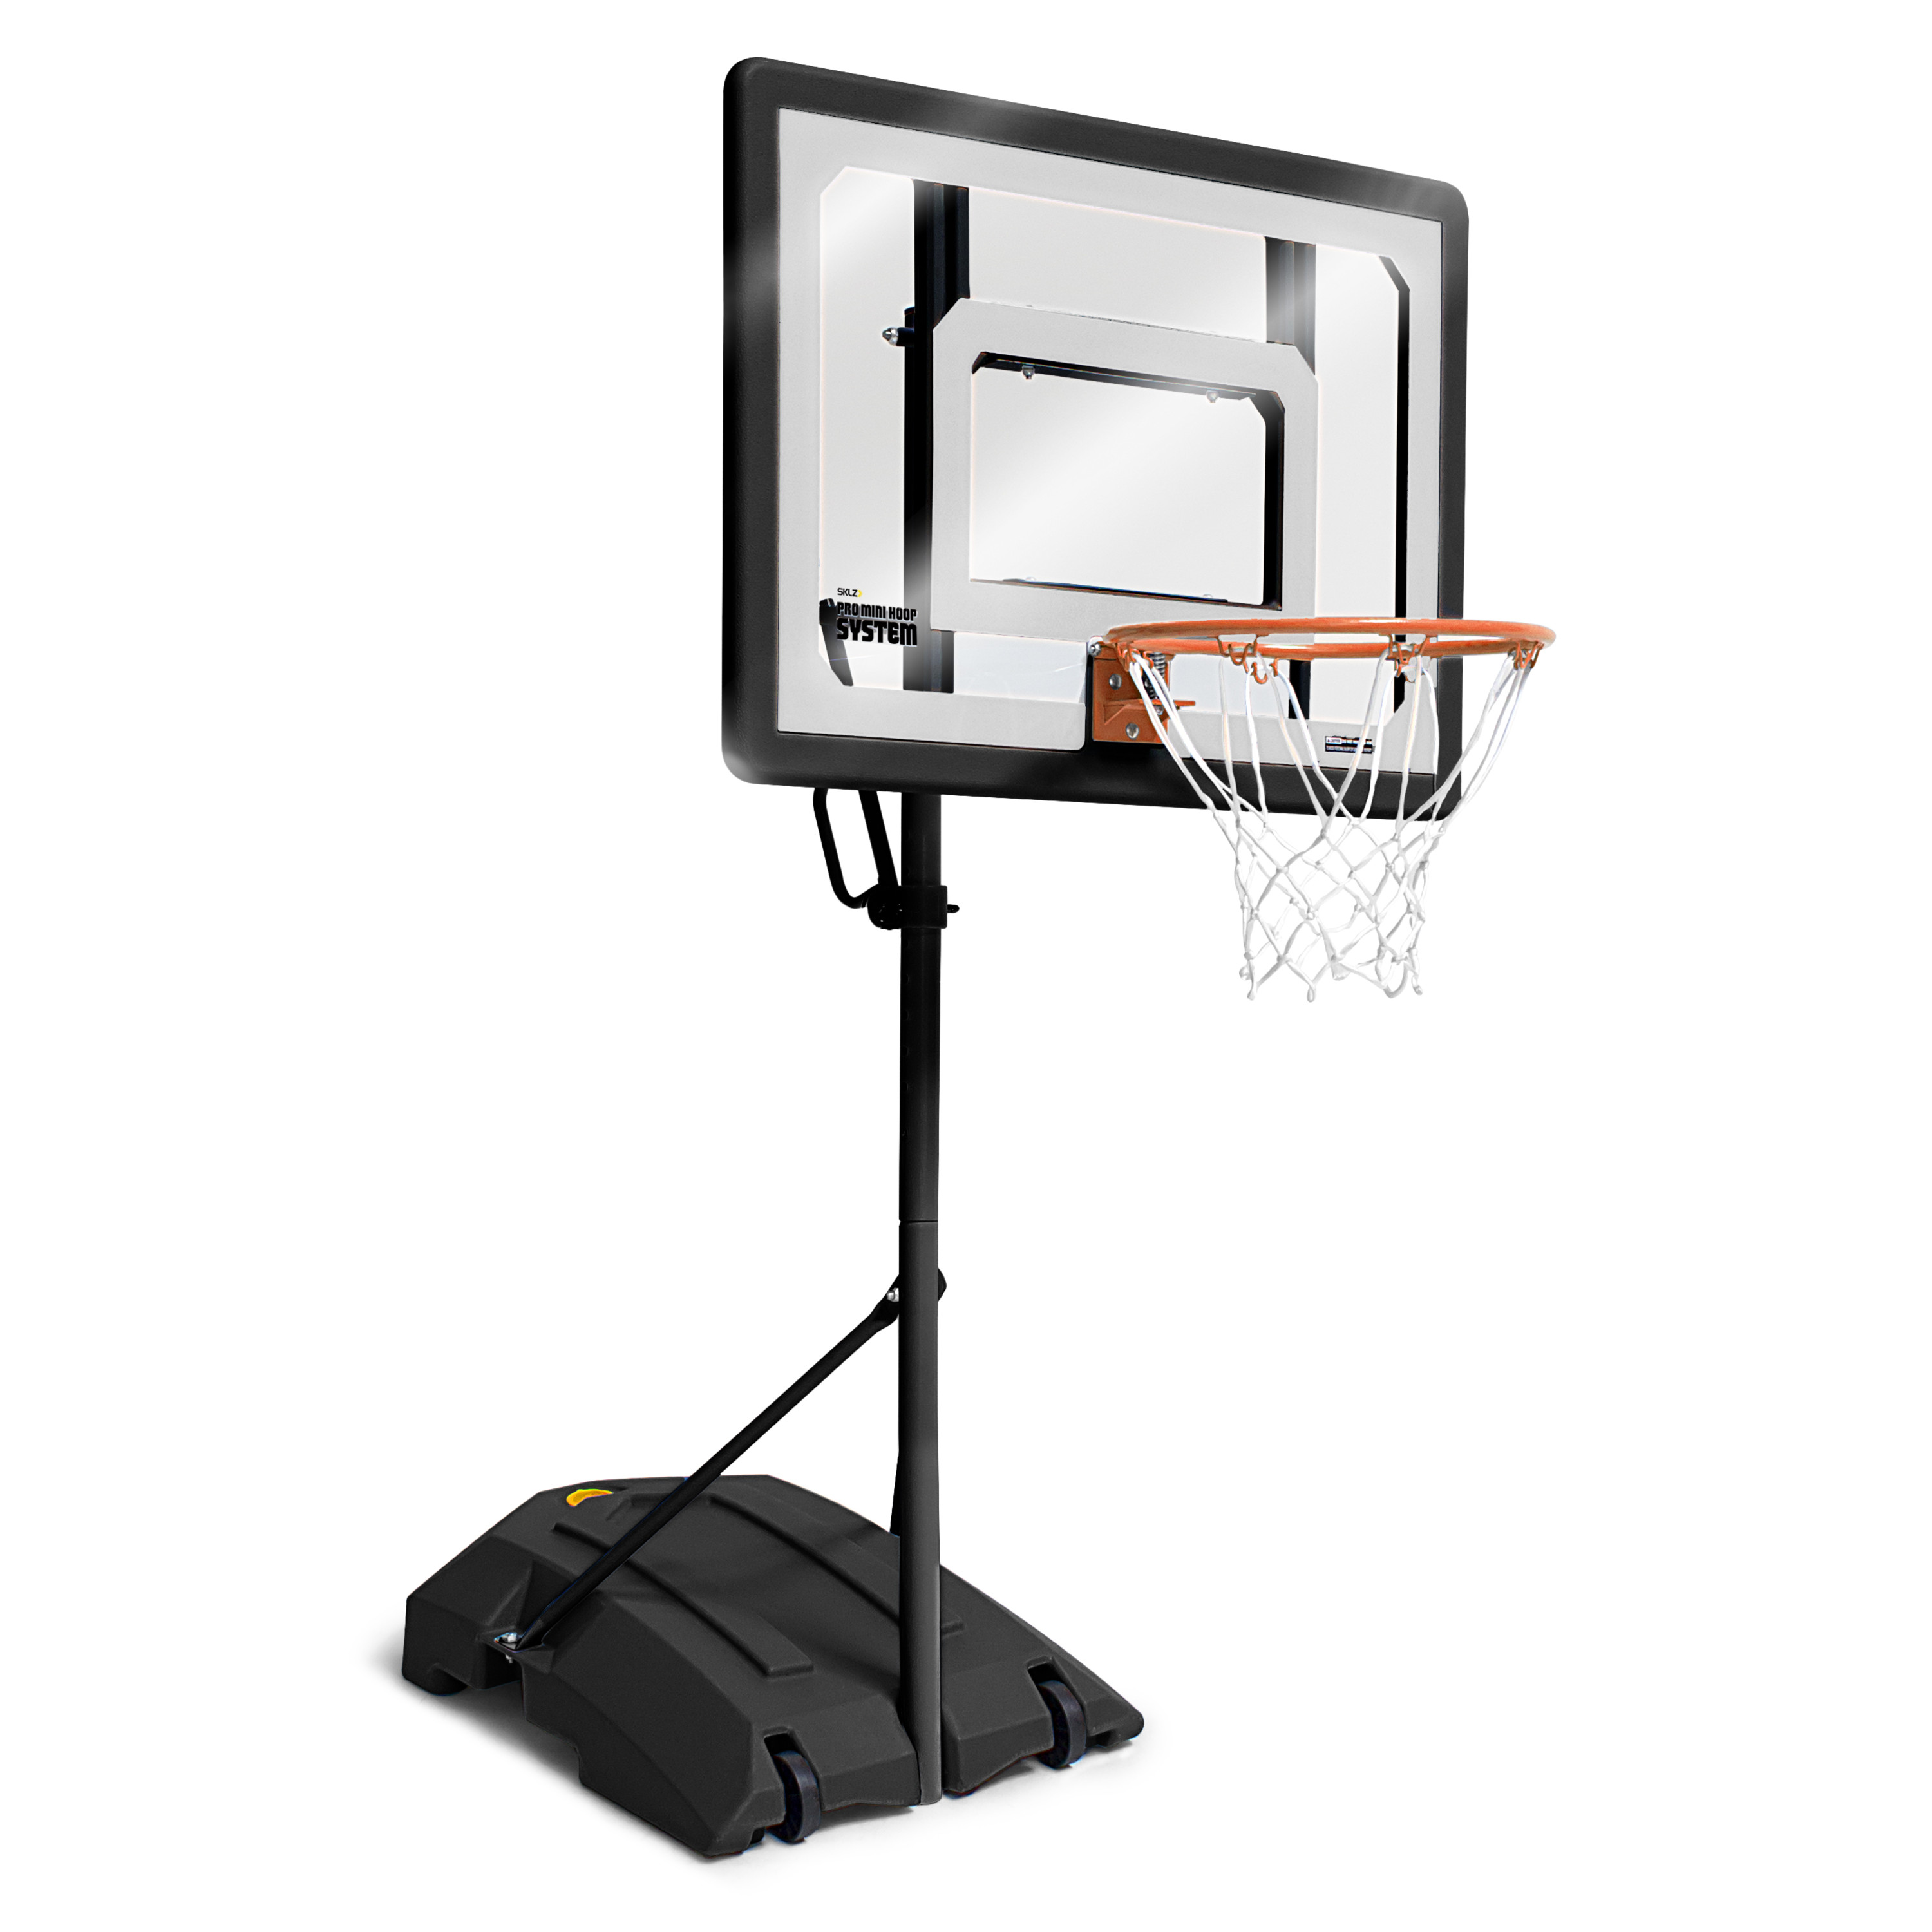 SKLZ Pro Mini Portable Basketball System Hoop with Adjustable Height 3.5 to 7 Ft., Includes 7 In. Mini Ball - image 1 of 12